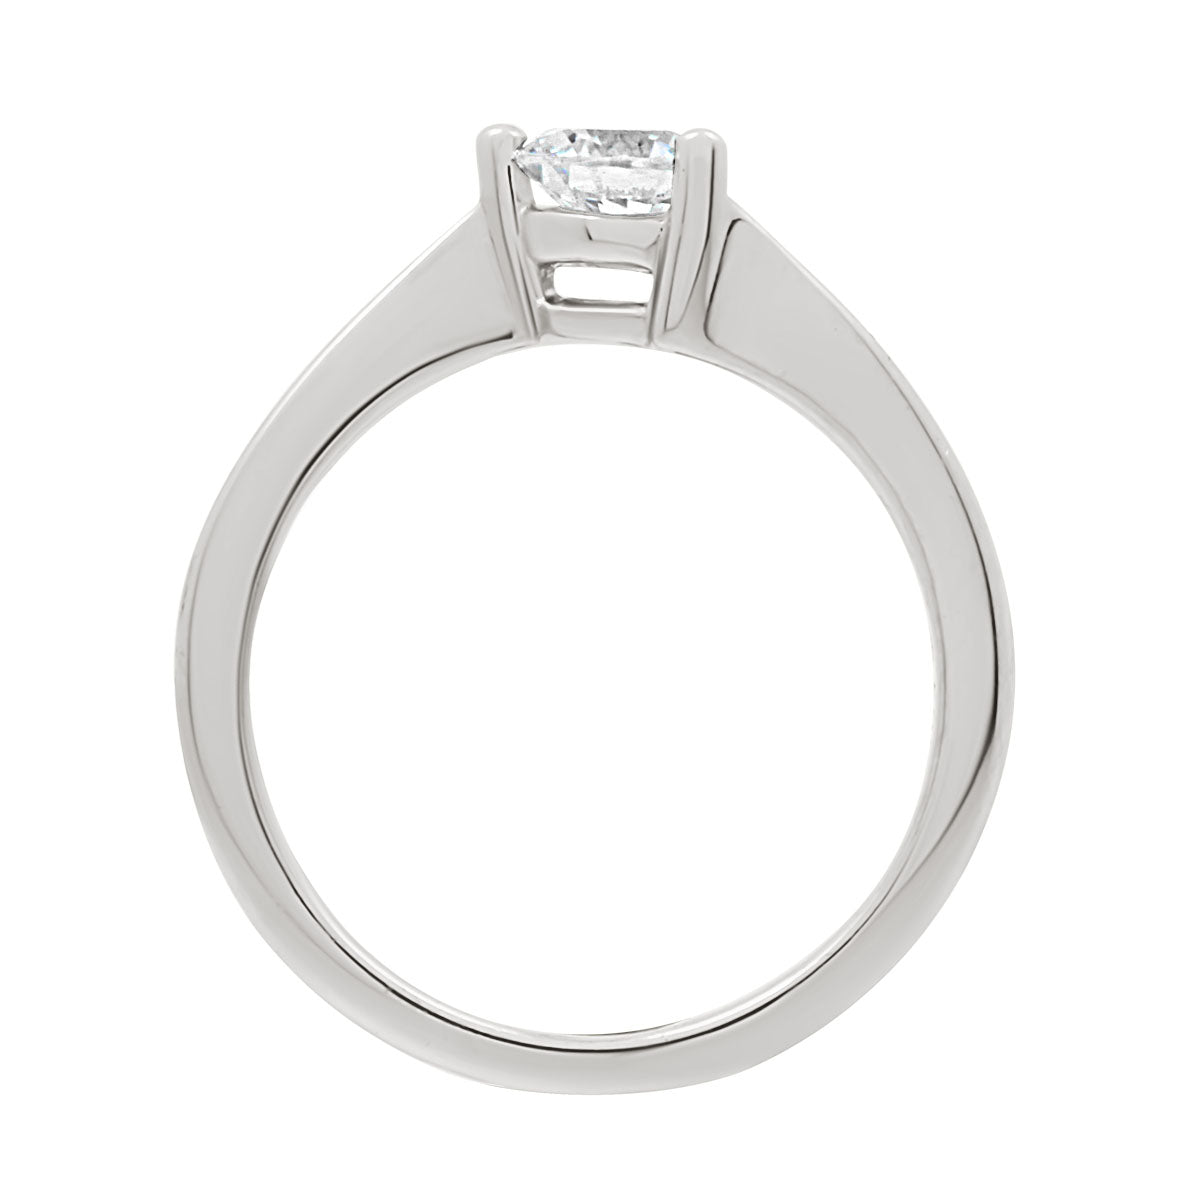 Three Claw Engagement Ring in white gold standing vertical